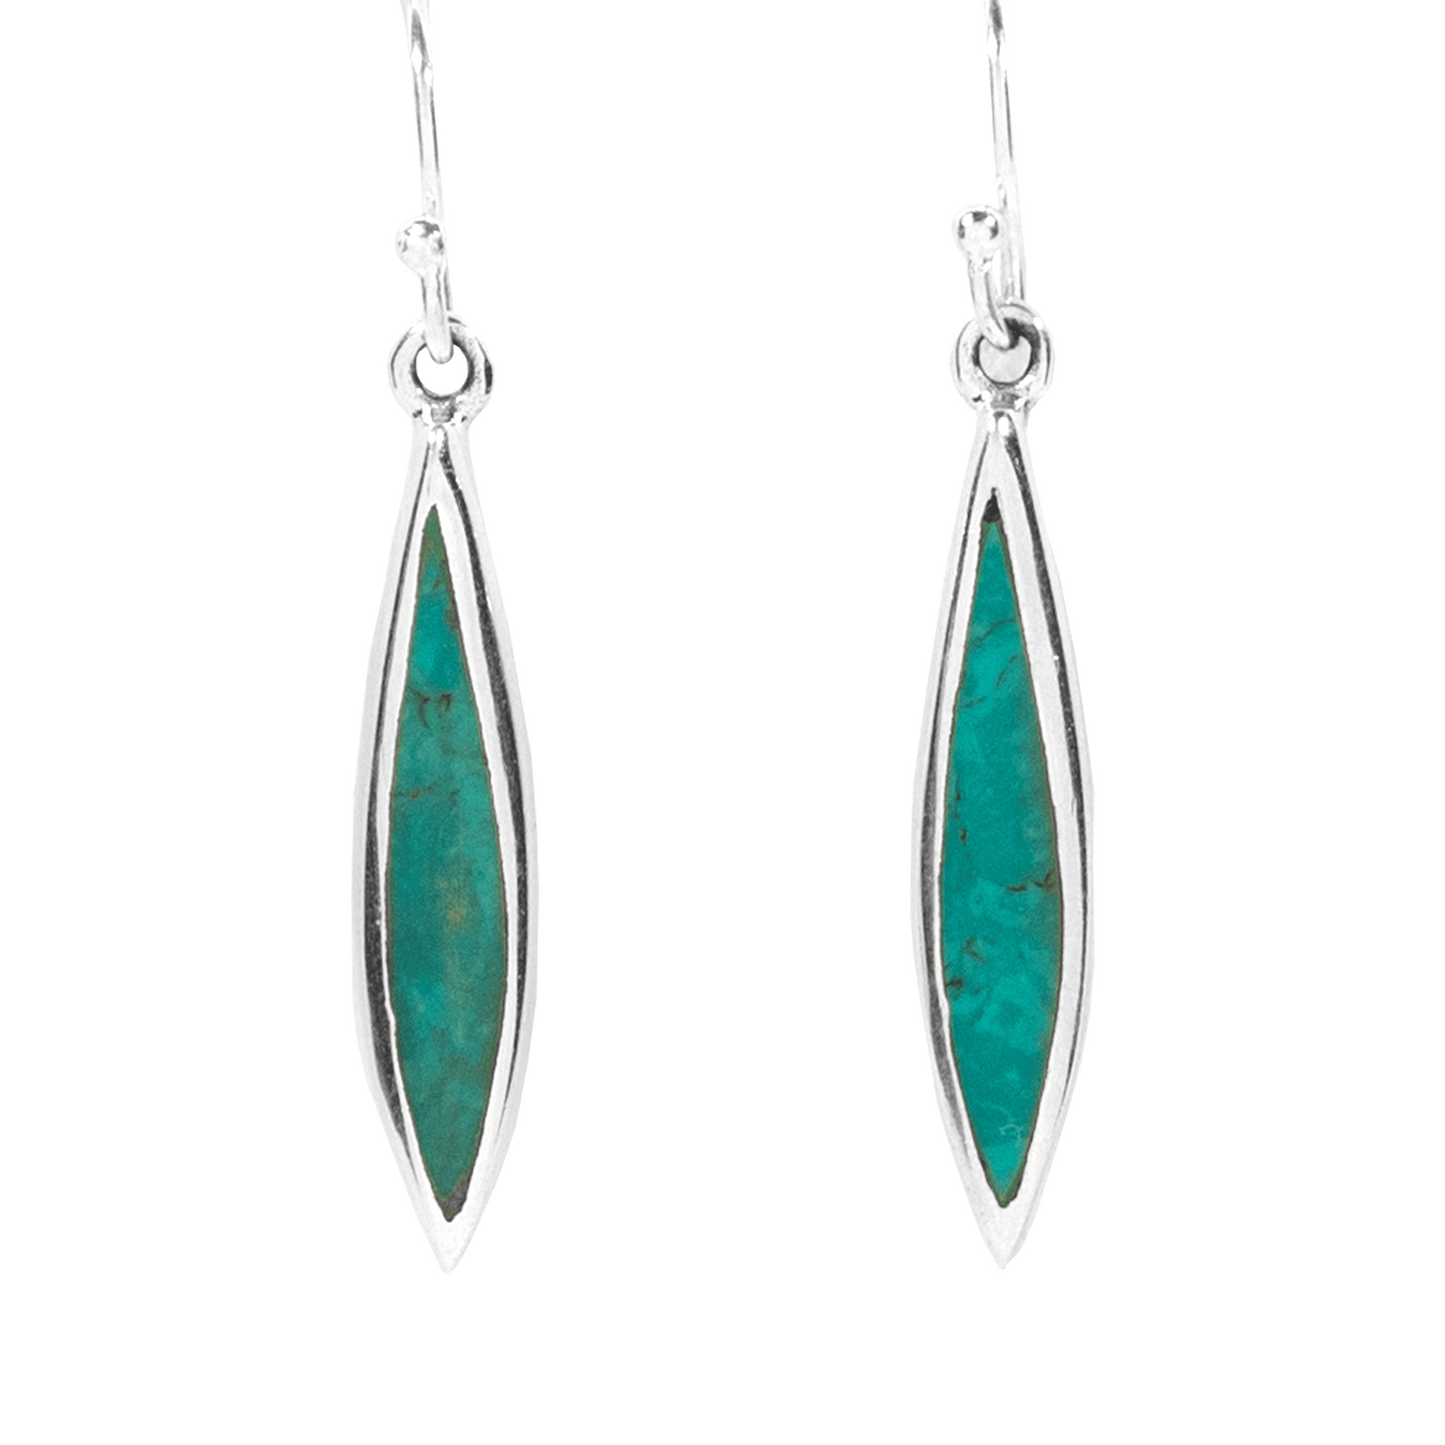 Eilat Stone narrow tear-drop earrings with pointed top and bottom sterling silver